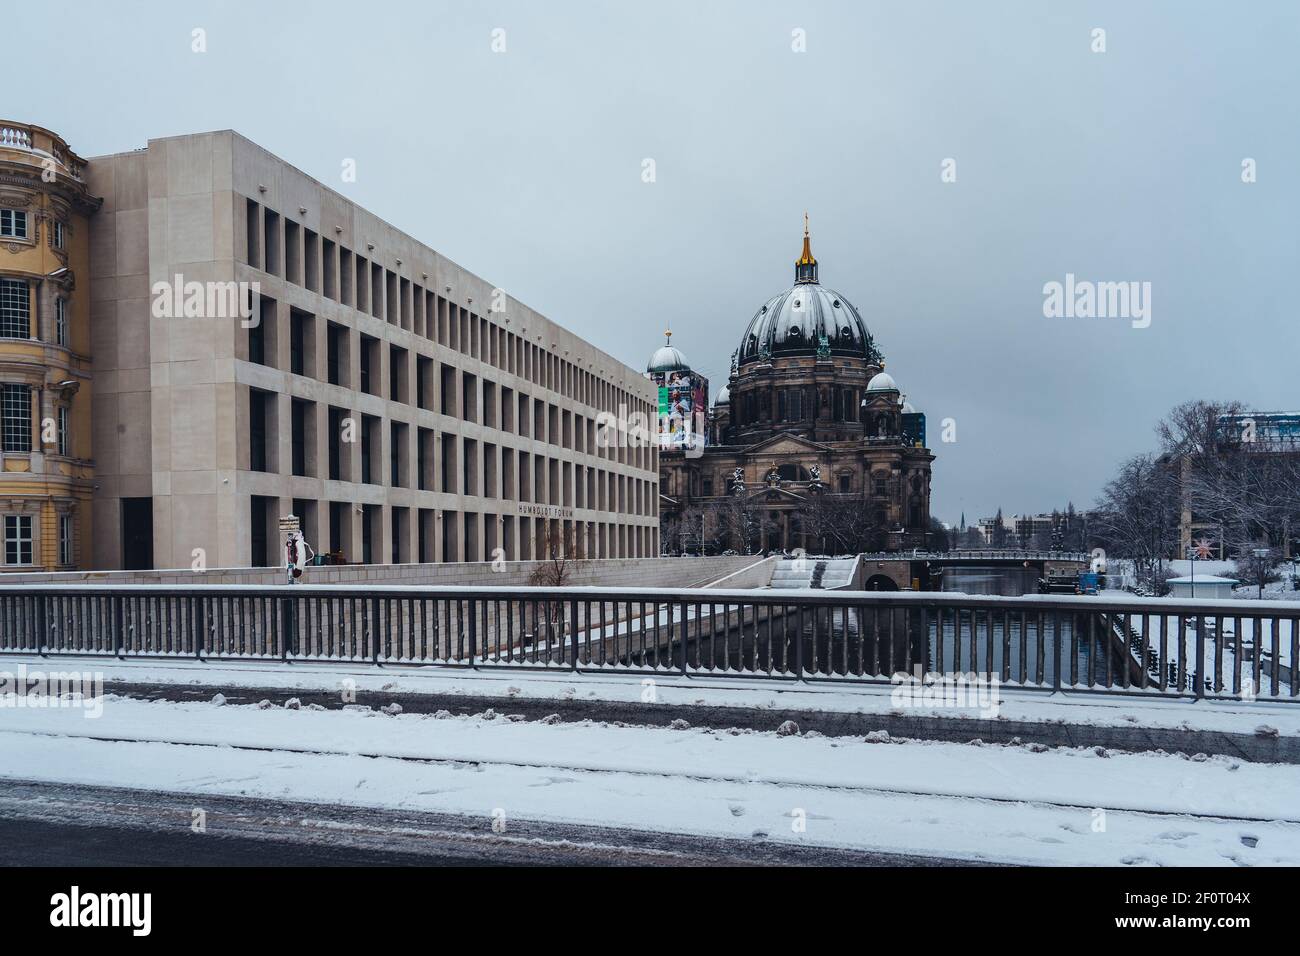 BERLIN, GERMANY - Feb 10, 2021: Snow covered Berlin Cathedral with Royal Castle or city palace and Humboldt Forum on a winter day. Stock Photo